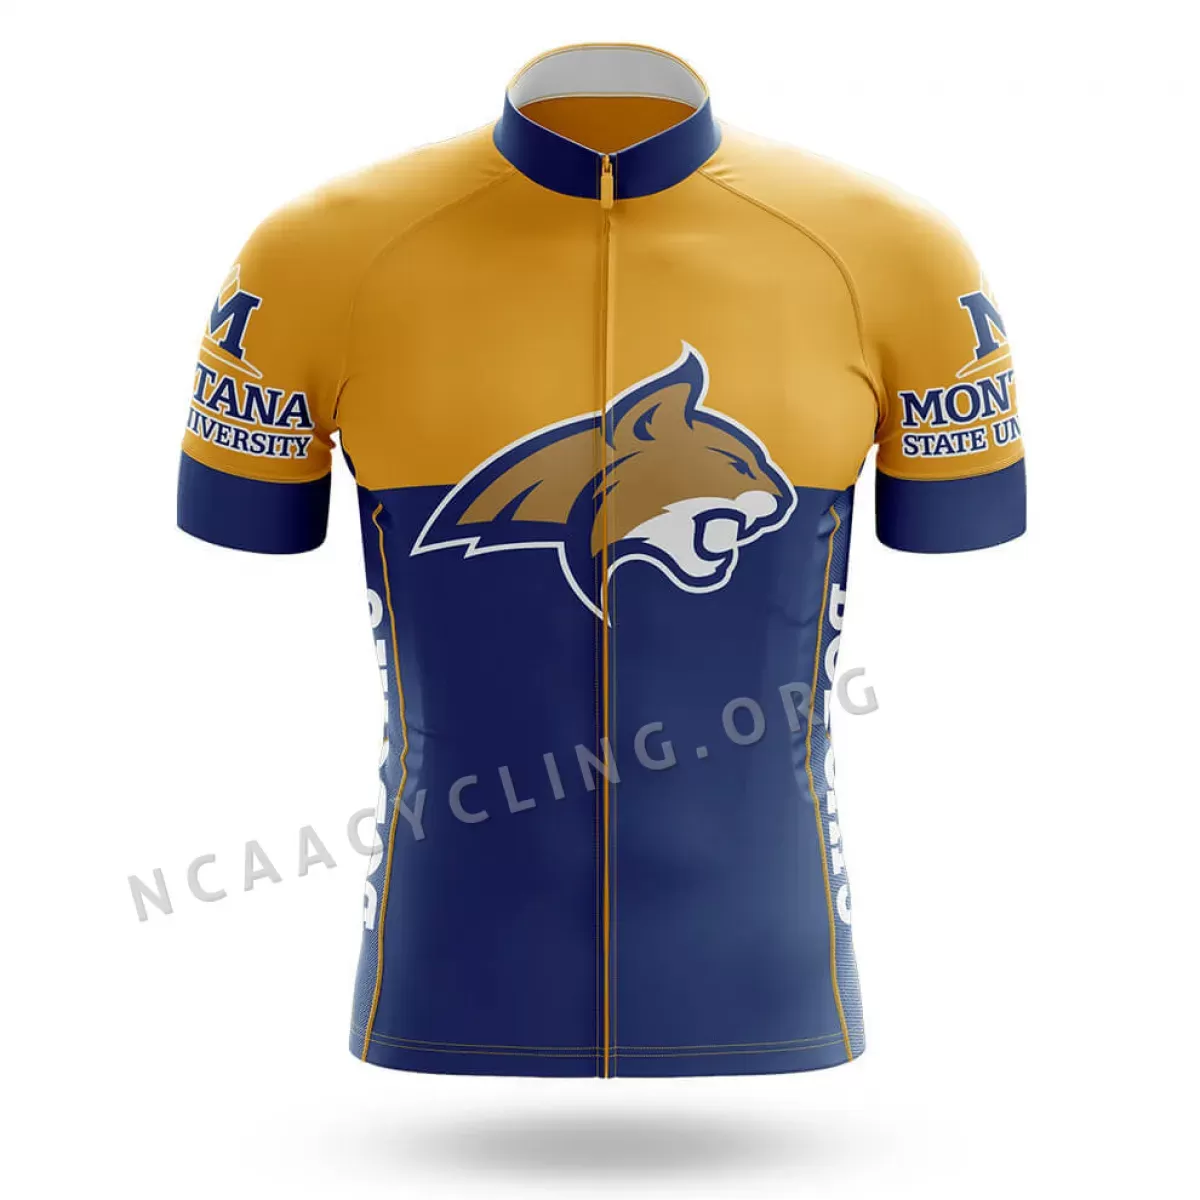 Montana State University Cycling Jersey Ver.2 For Sale